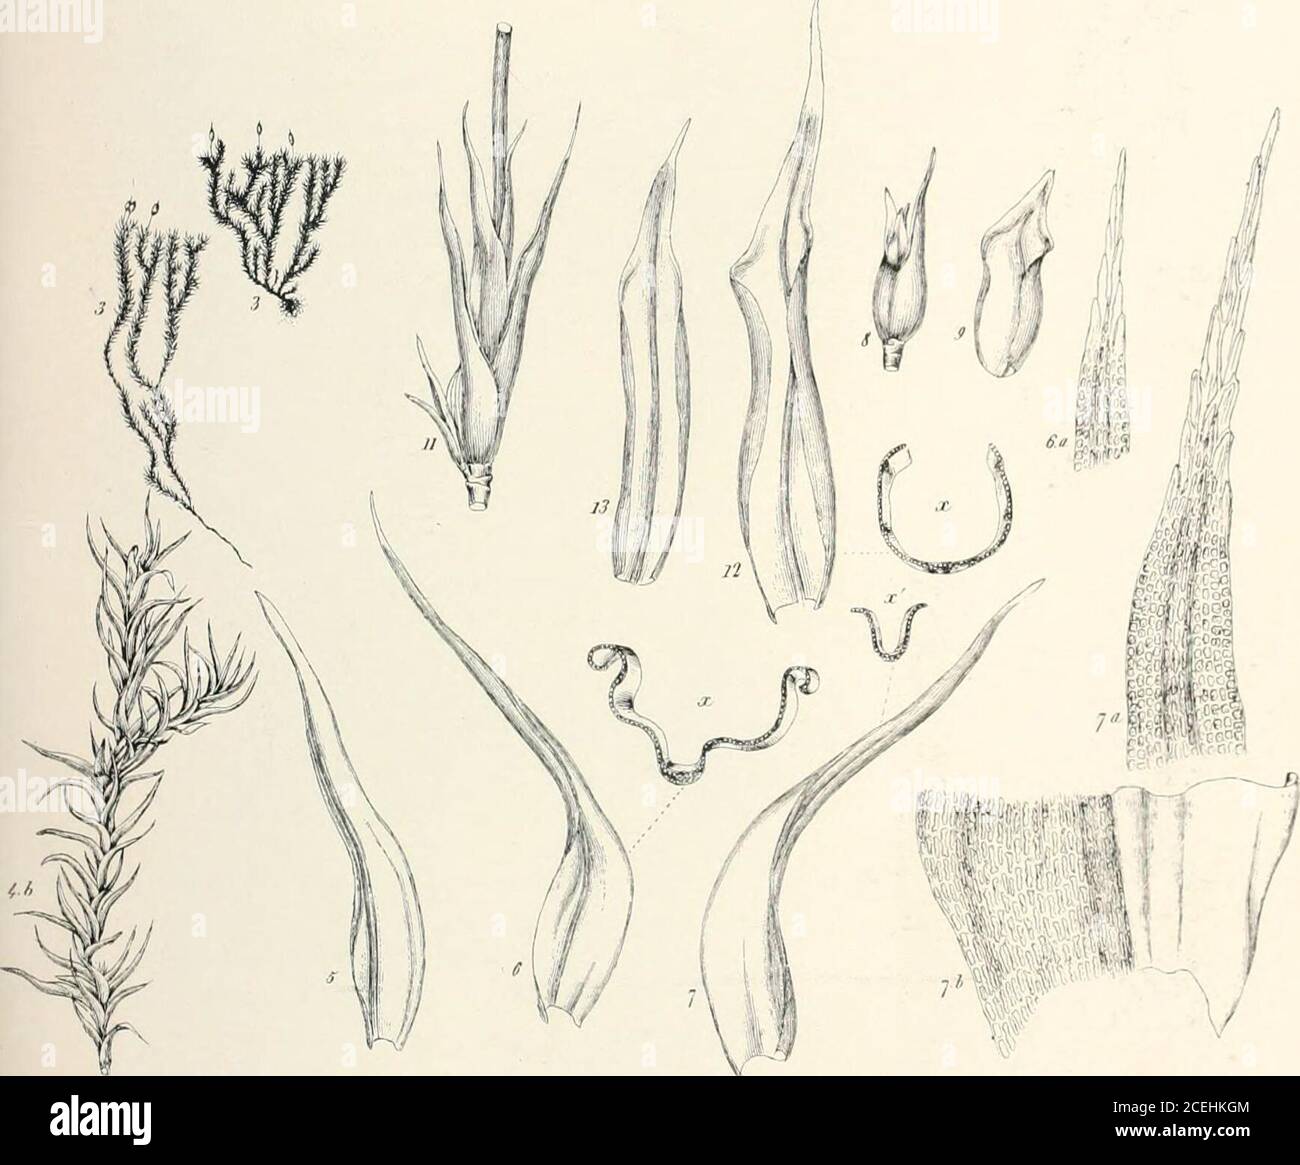 . Mosses with hand-lens and microscope : a non-technical hand-book of the more common mosses of the northeastern United States. ja.taatlaii PLATE XXII. Rhacomitrium fasciciilare. (From Bry. Eur. I. Plant natural size, showing characteristic method of branching, -jb. Basal leaf-cells. 19. Peristome anilcapsule wall in section. 21. Cells from annuhis. The other figures are self-explanatory. CRIMMIACEAE 127 upper h-af-cills )oiiiii/is/i-i/iiiii/i(ili hyaline leaf-apices present, denticuiate; cosUistout; peristome teeth irn^iilarly divided; spores maturing in spring. Fre-quently confused with mi Stock Photo